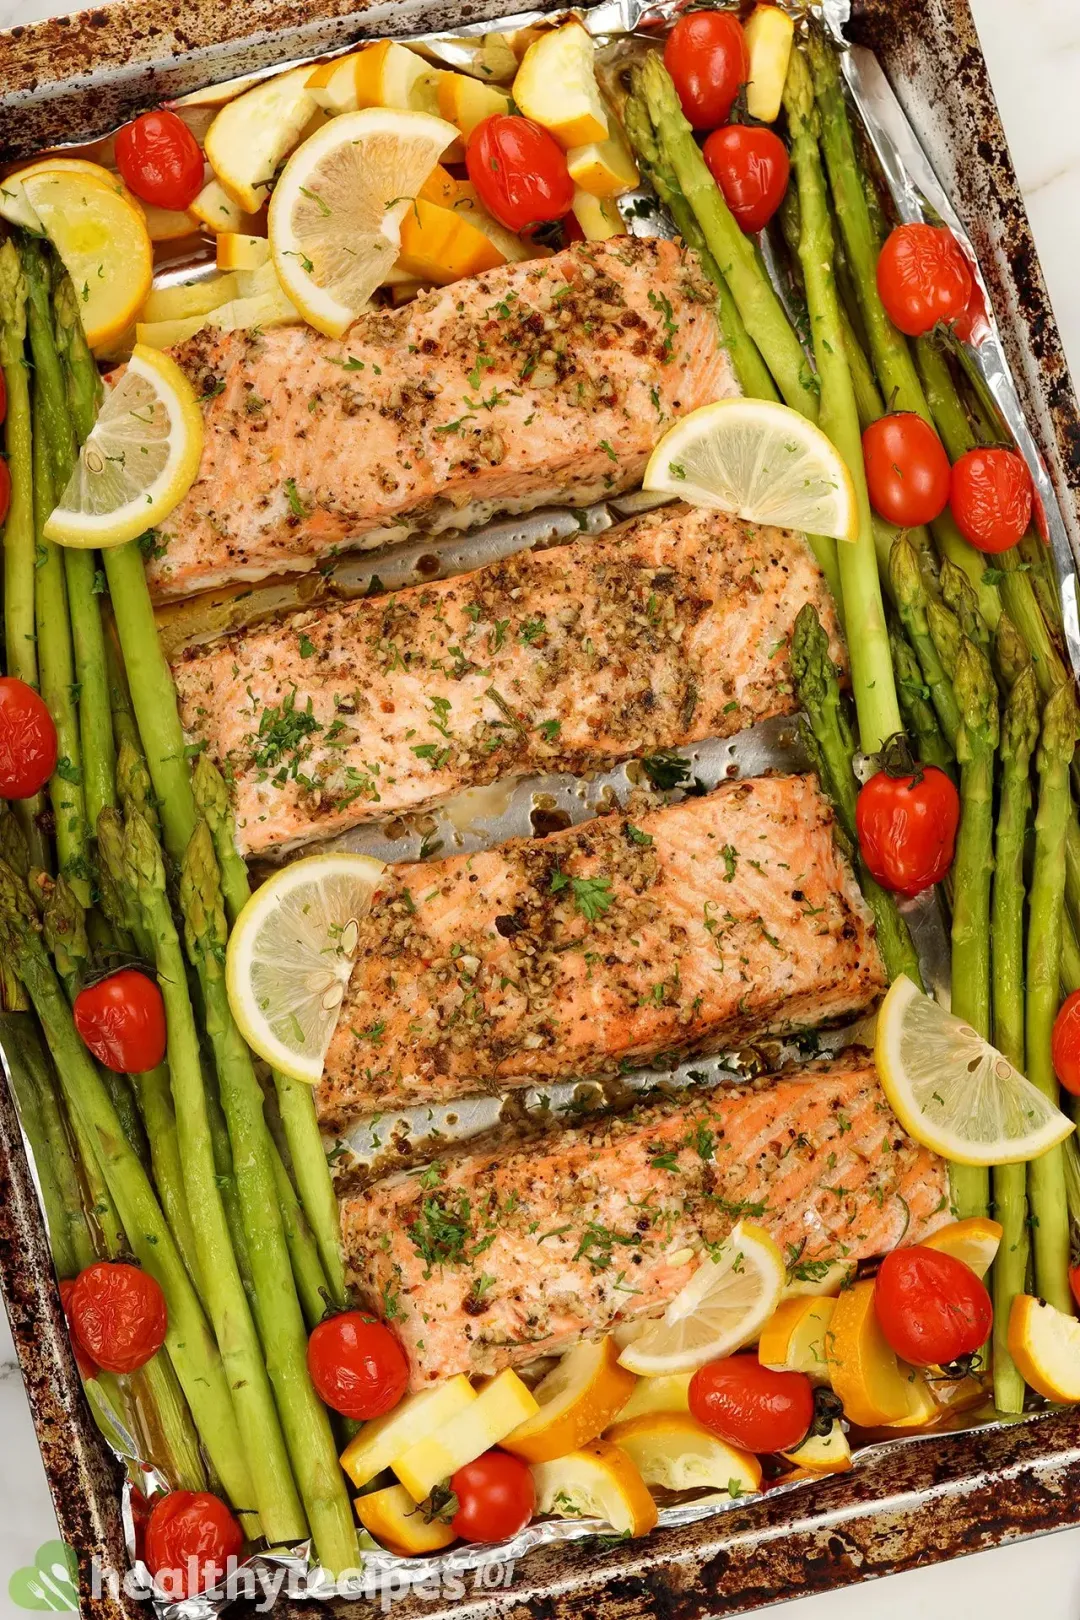 A baking tray lined with parchment paper full of seasoned salmon fillets, asparagus, cherry tomatoes, zucchini, and lemon slices